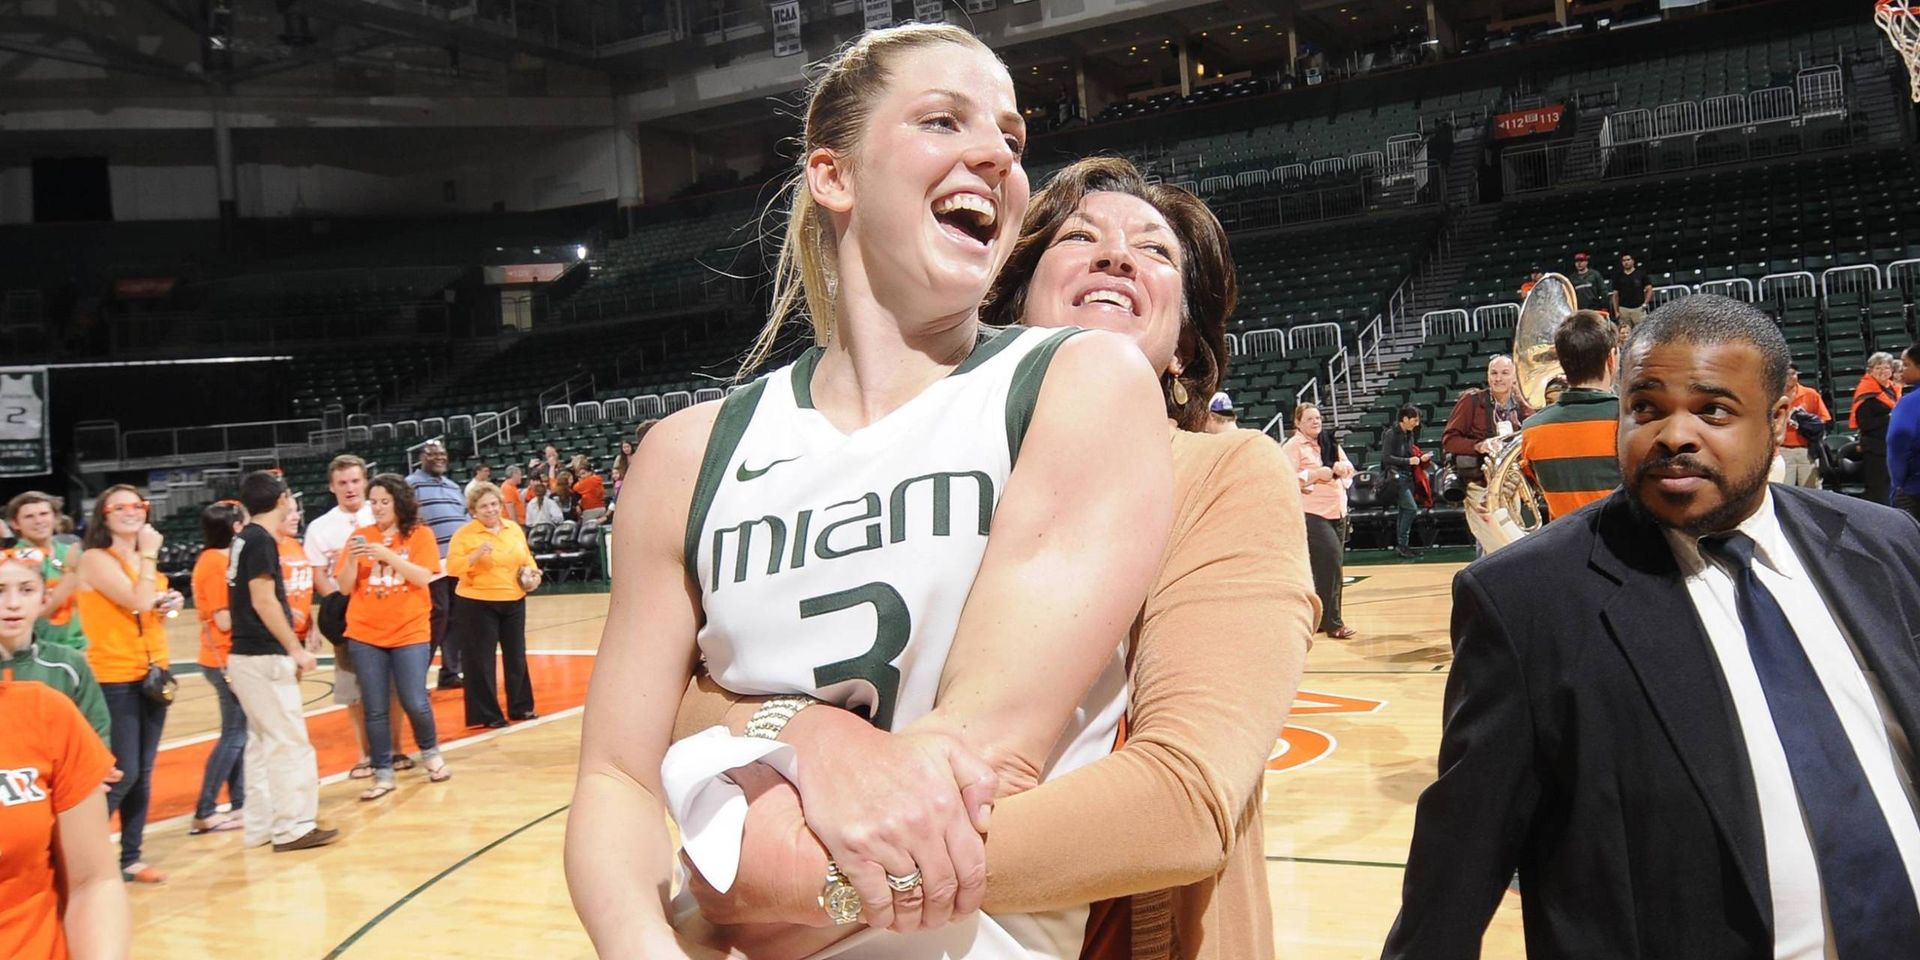 @MiamiWBB Goes Dancing As a No. 8 Seed